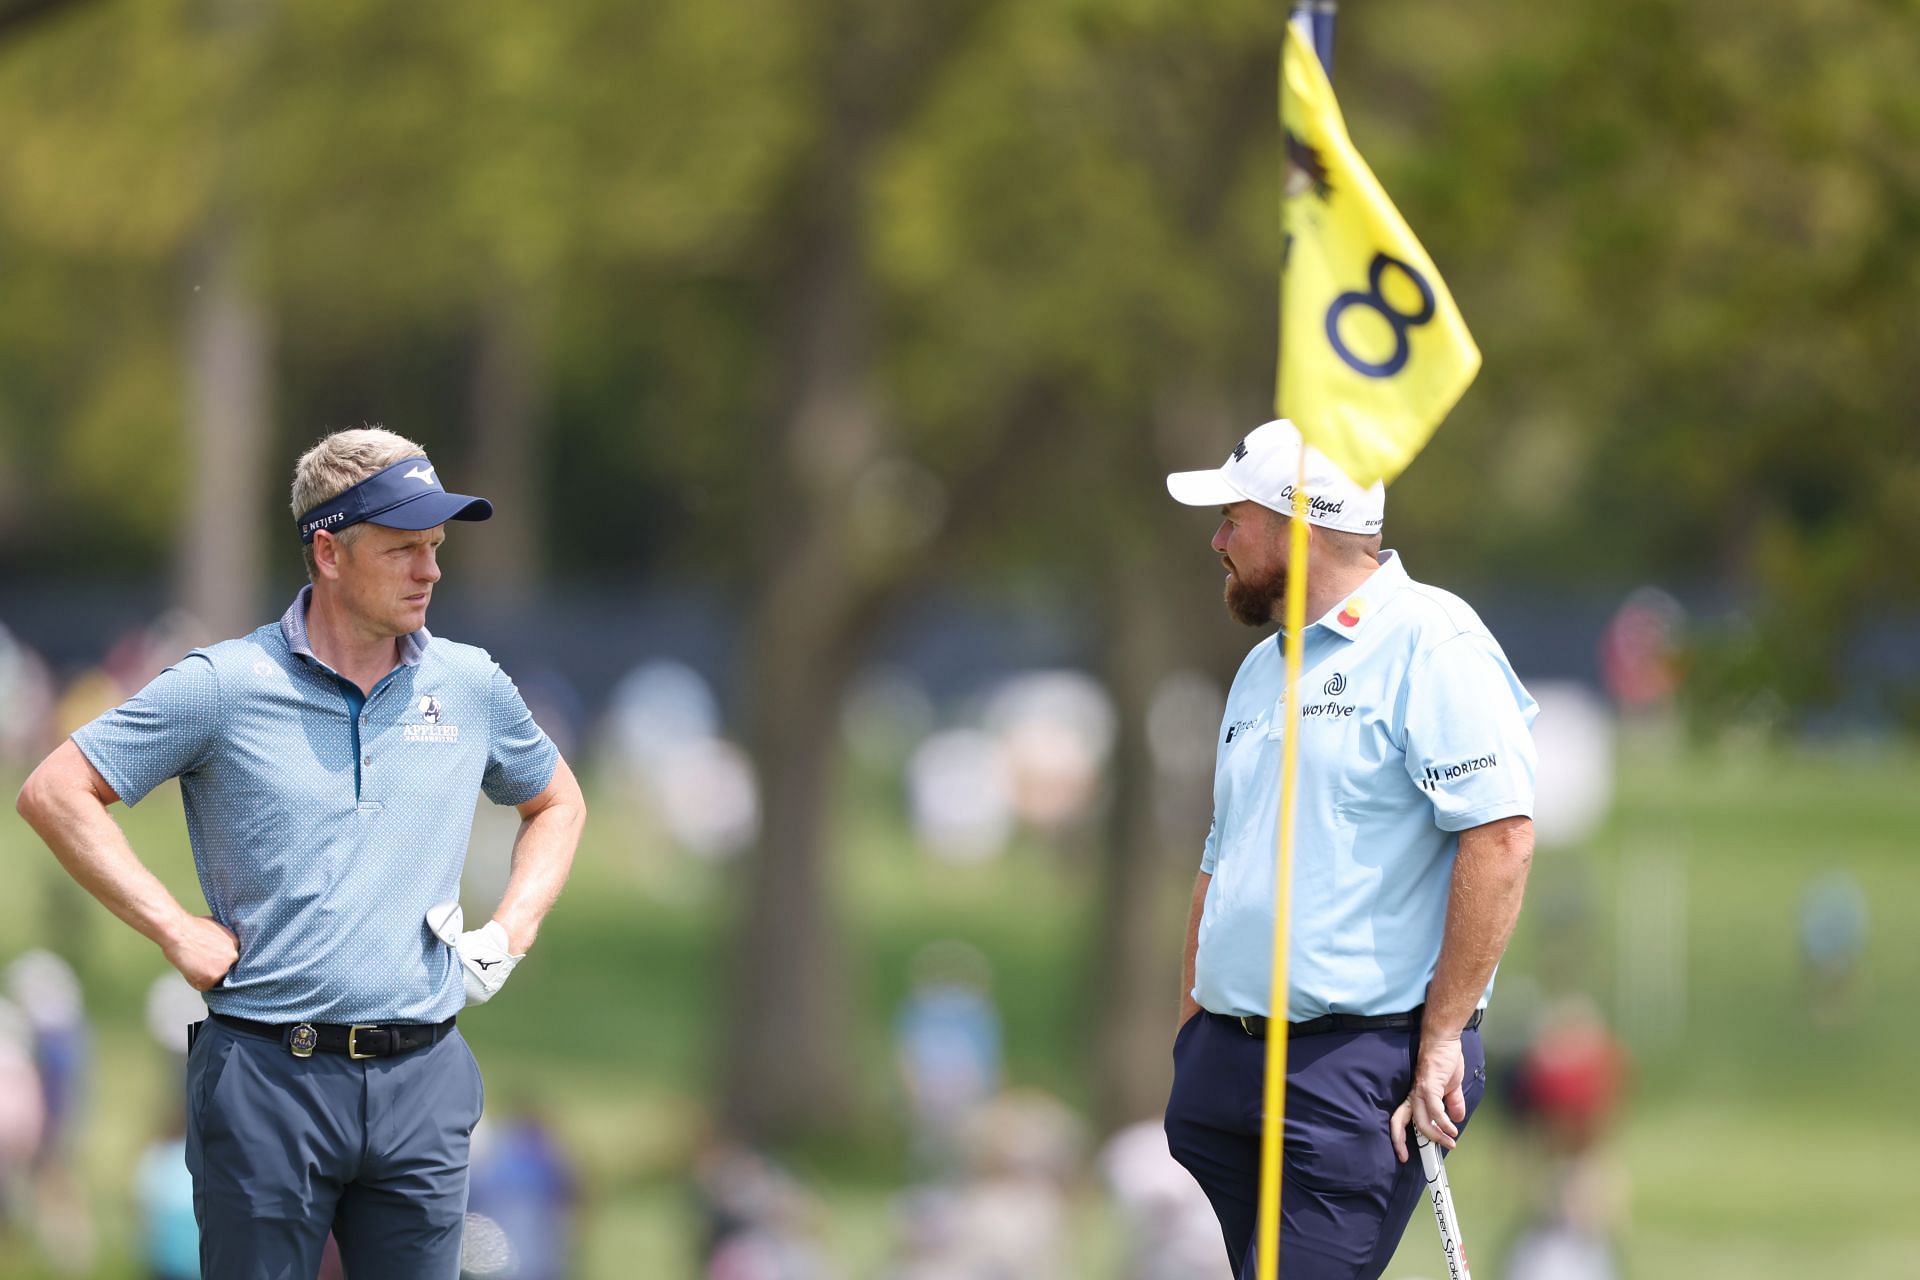 2023 PGA Championship - Preview Day One